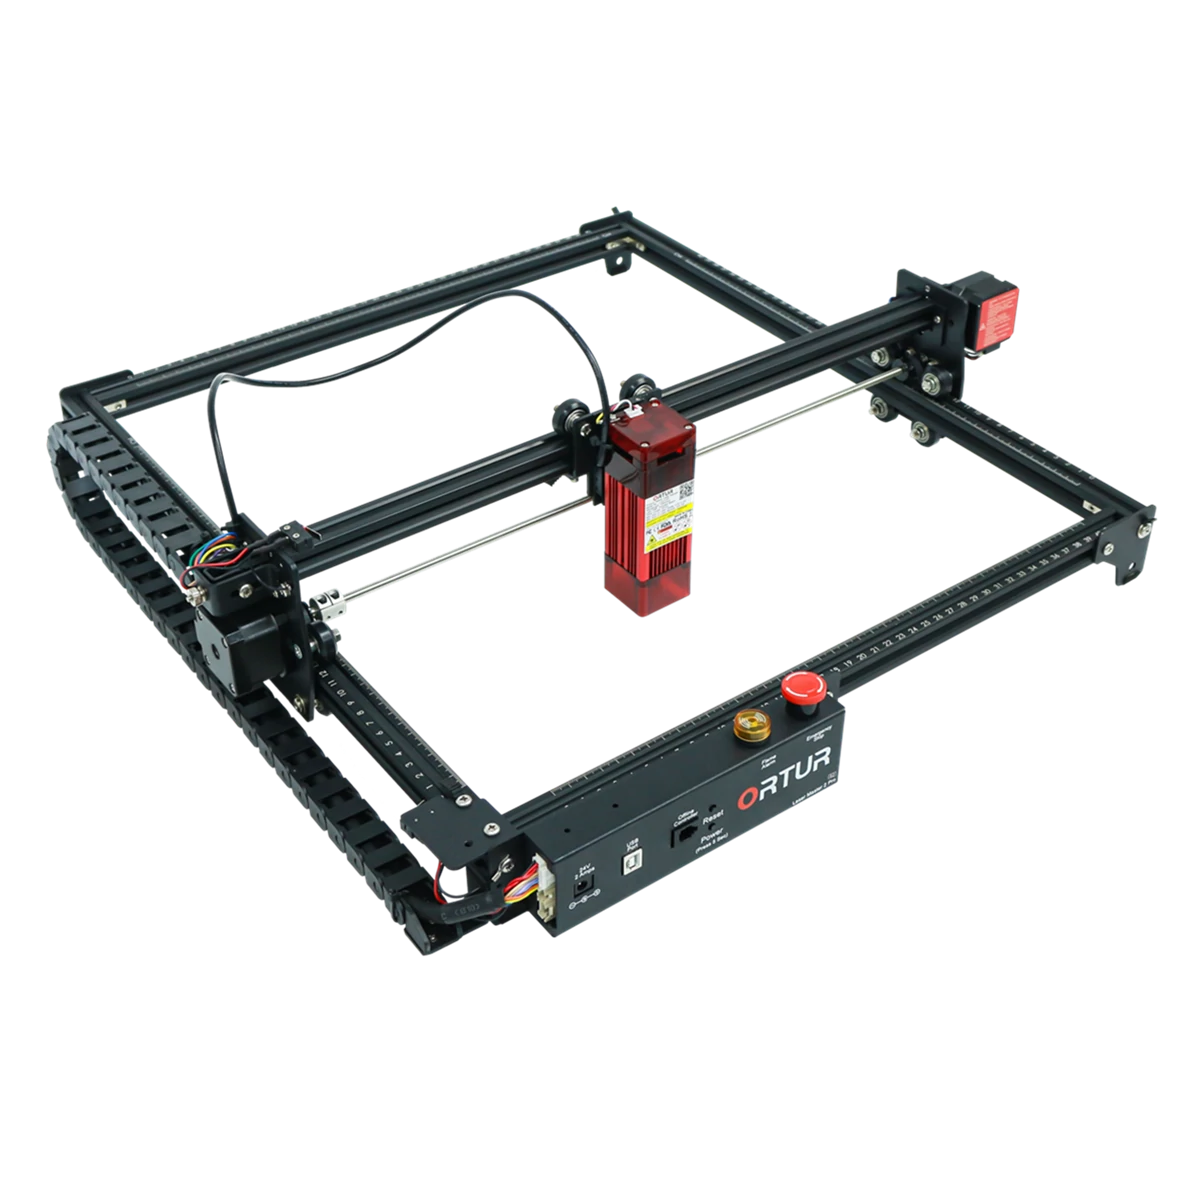 Find ORTUR Laser Master 2 Pro S2 Laser Engraving Cutting Machine Cutter 400 x 430mm Large Engraving Area Fast Speed High Precision Laser Engraver for Sale on Gipsybee.com